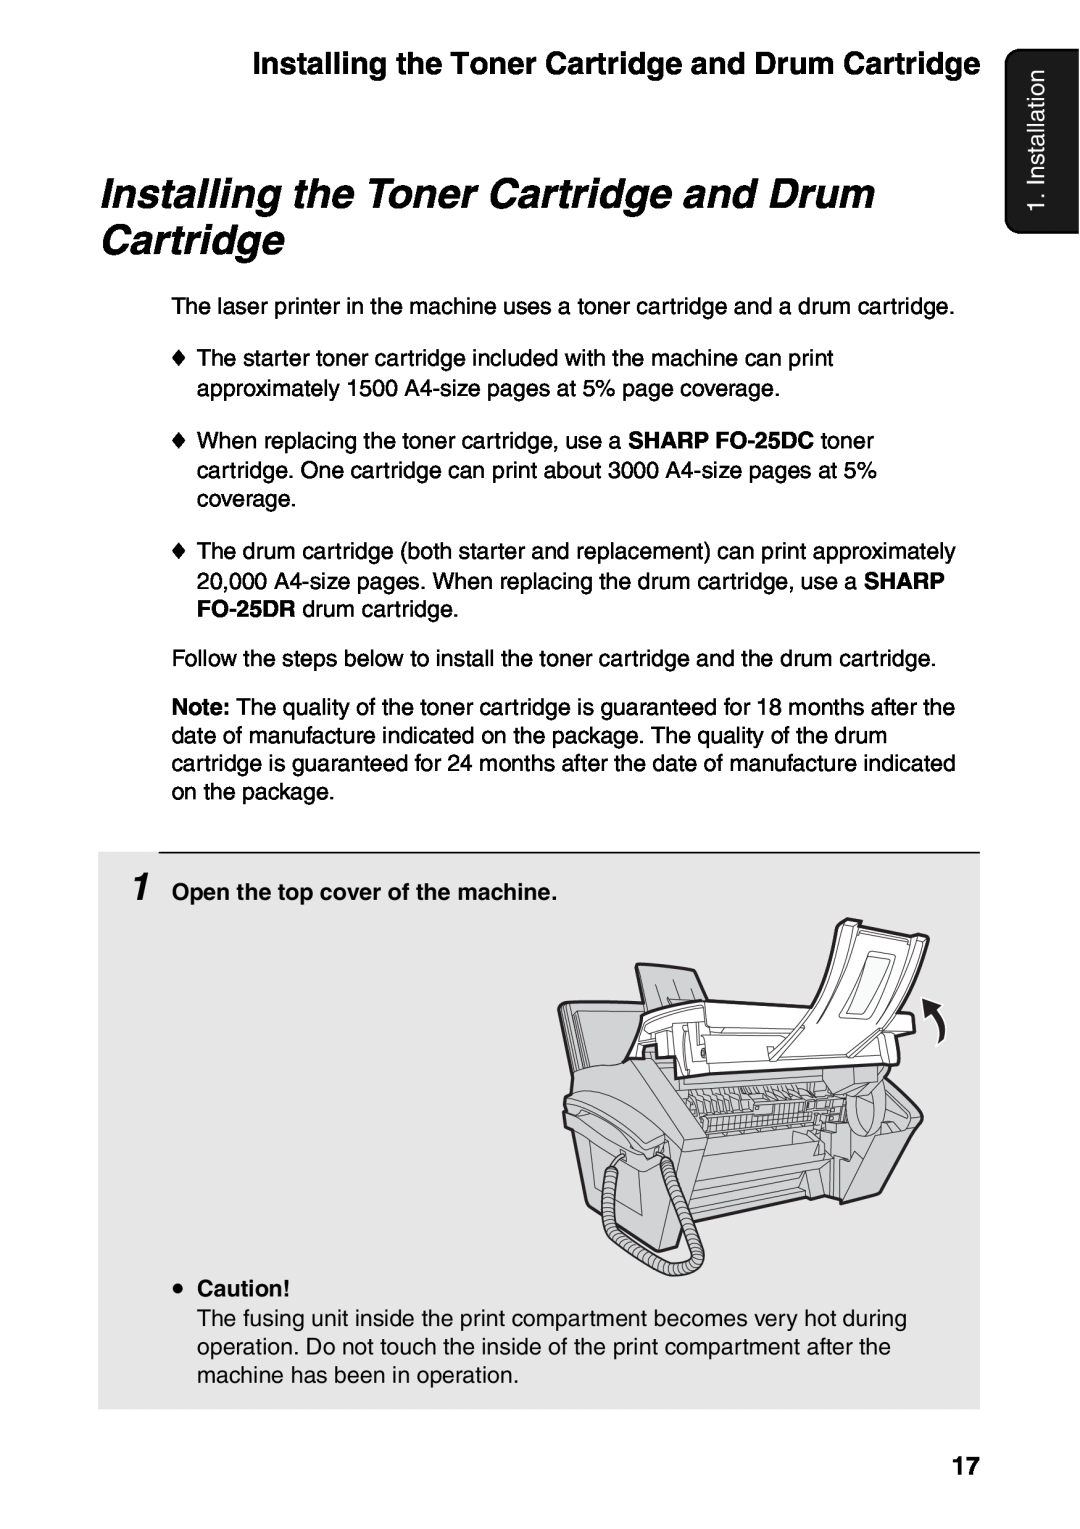 Sharp FO-IS115N operation manual Installing the Toner Cartridge and Drum Cartridge, Installation 